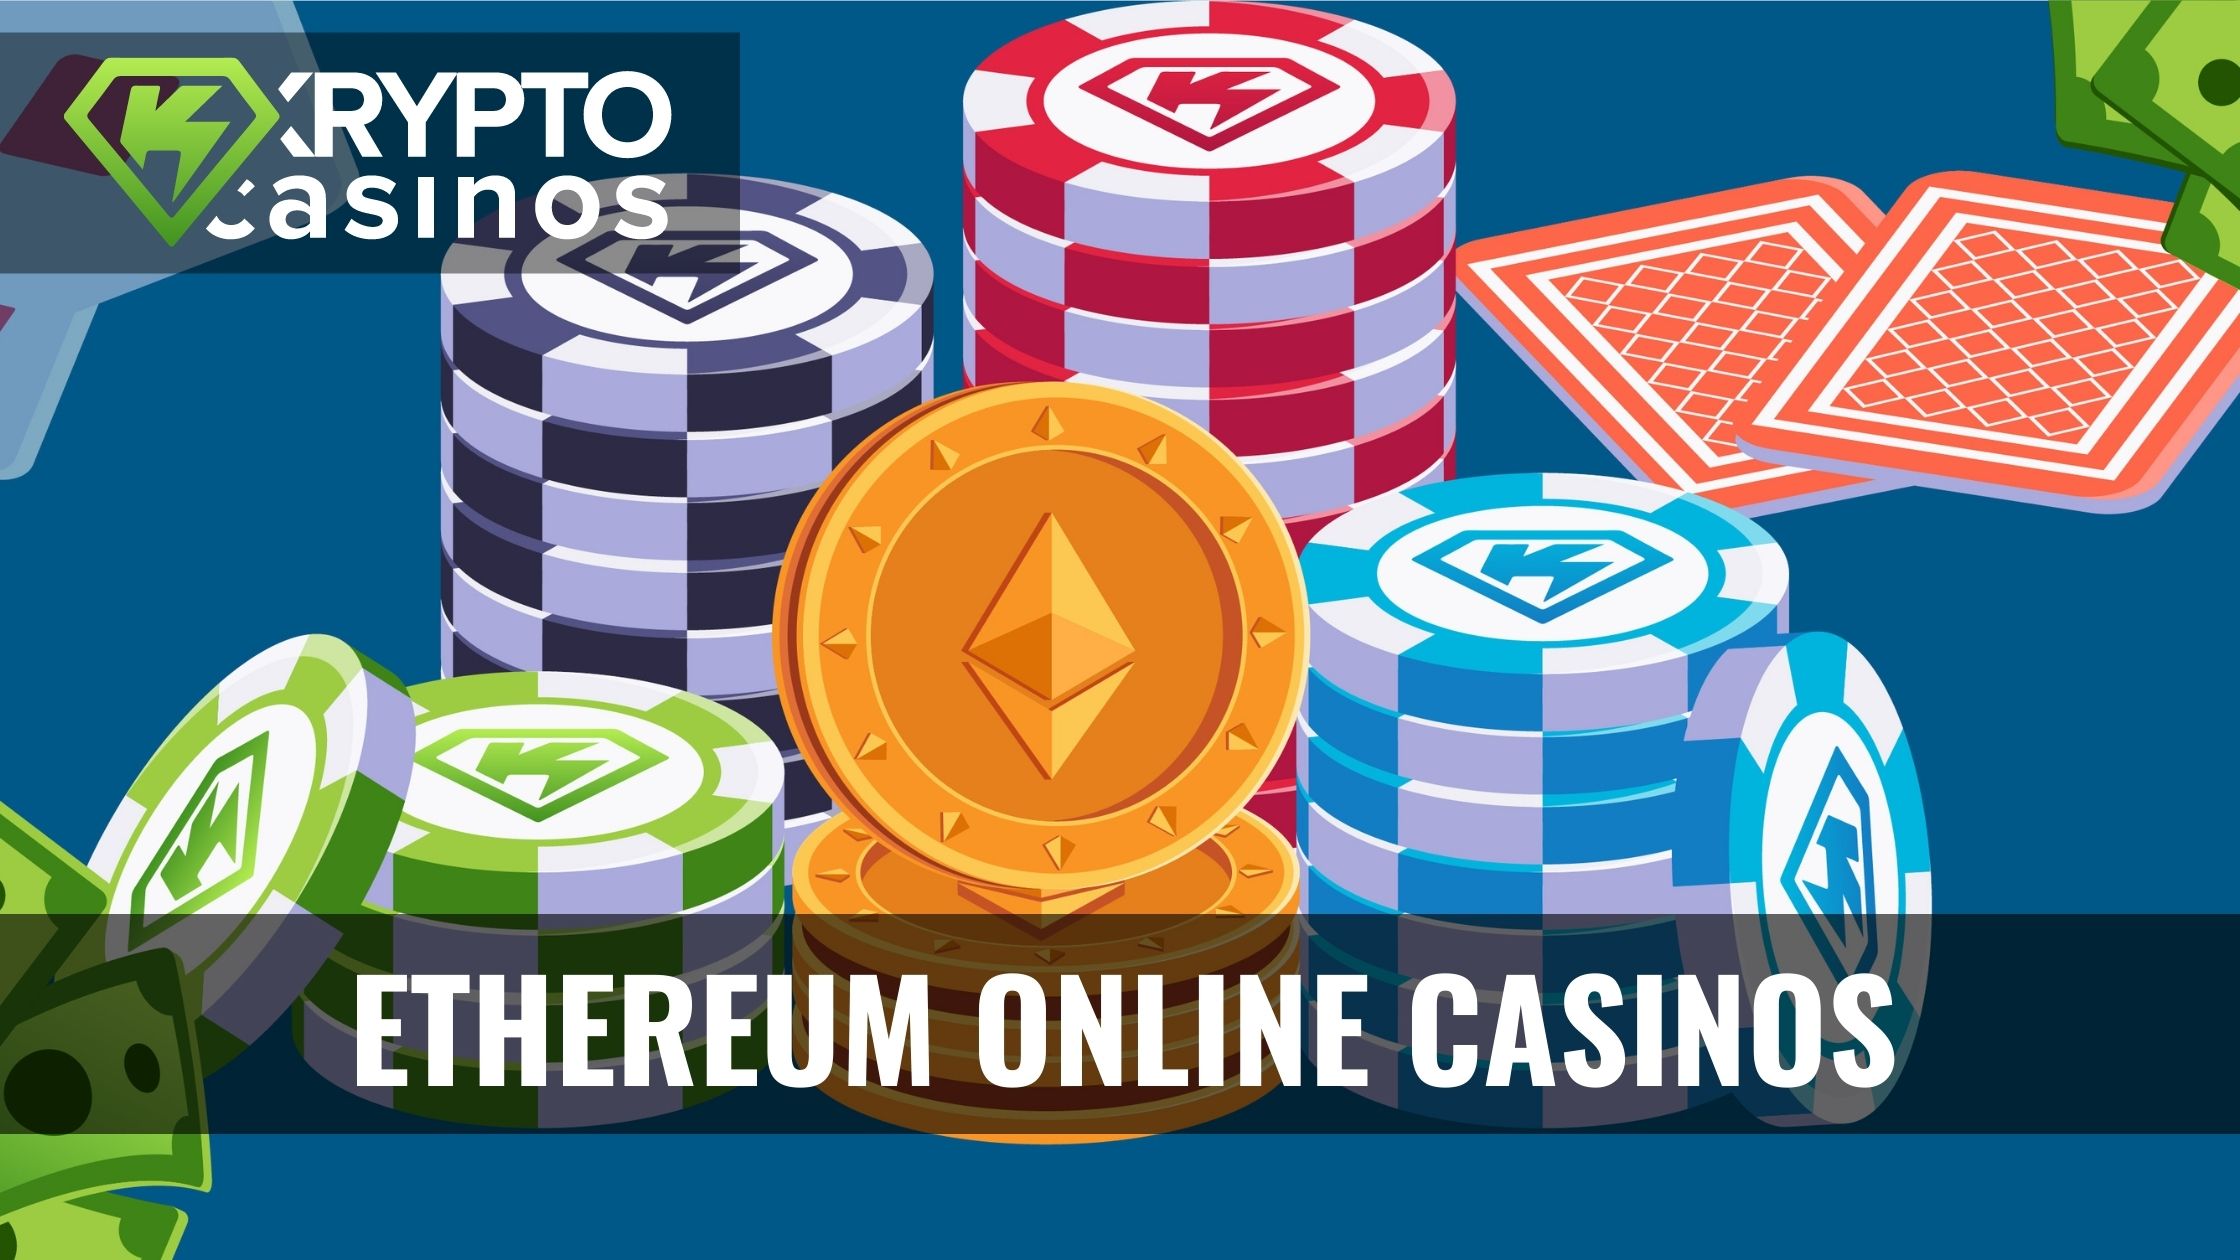 15 Creative Ways You Can Improve Your ethereum online casino